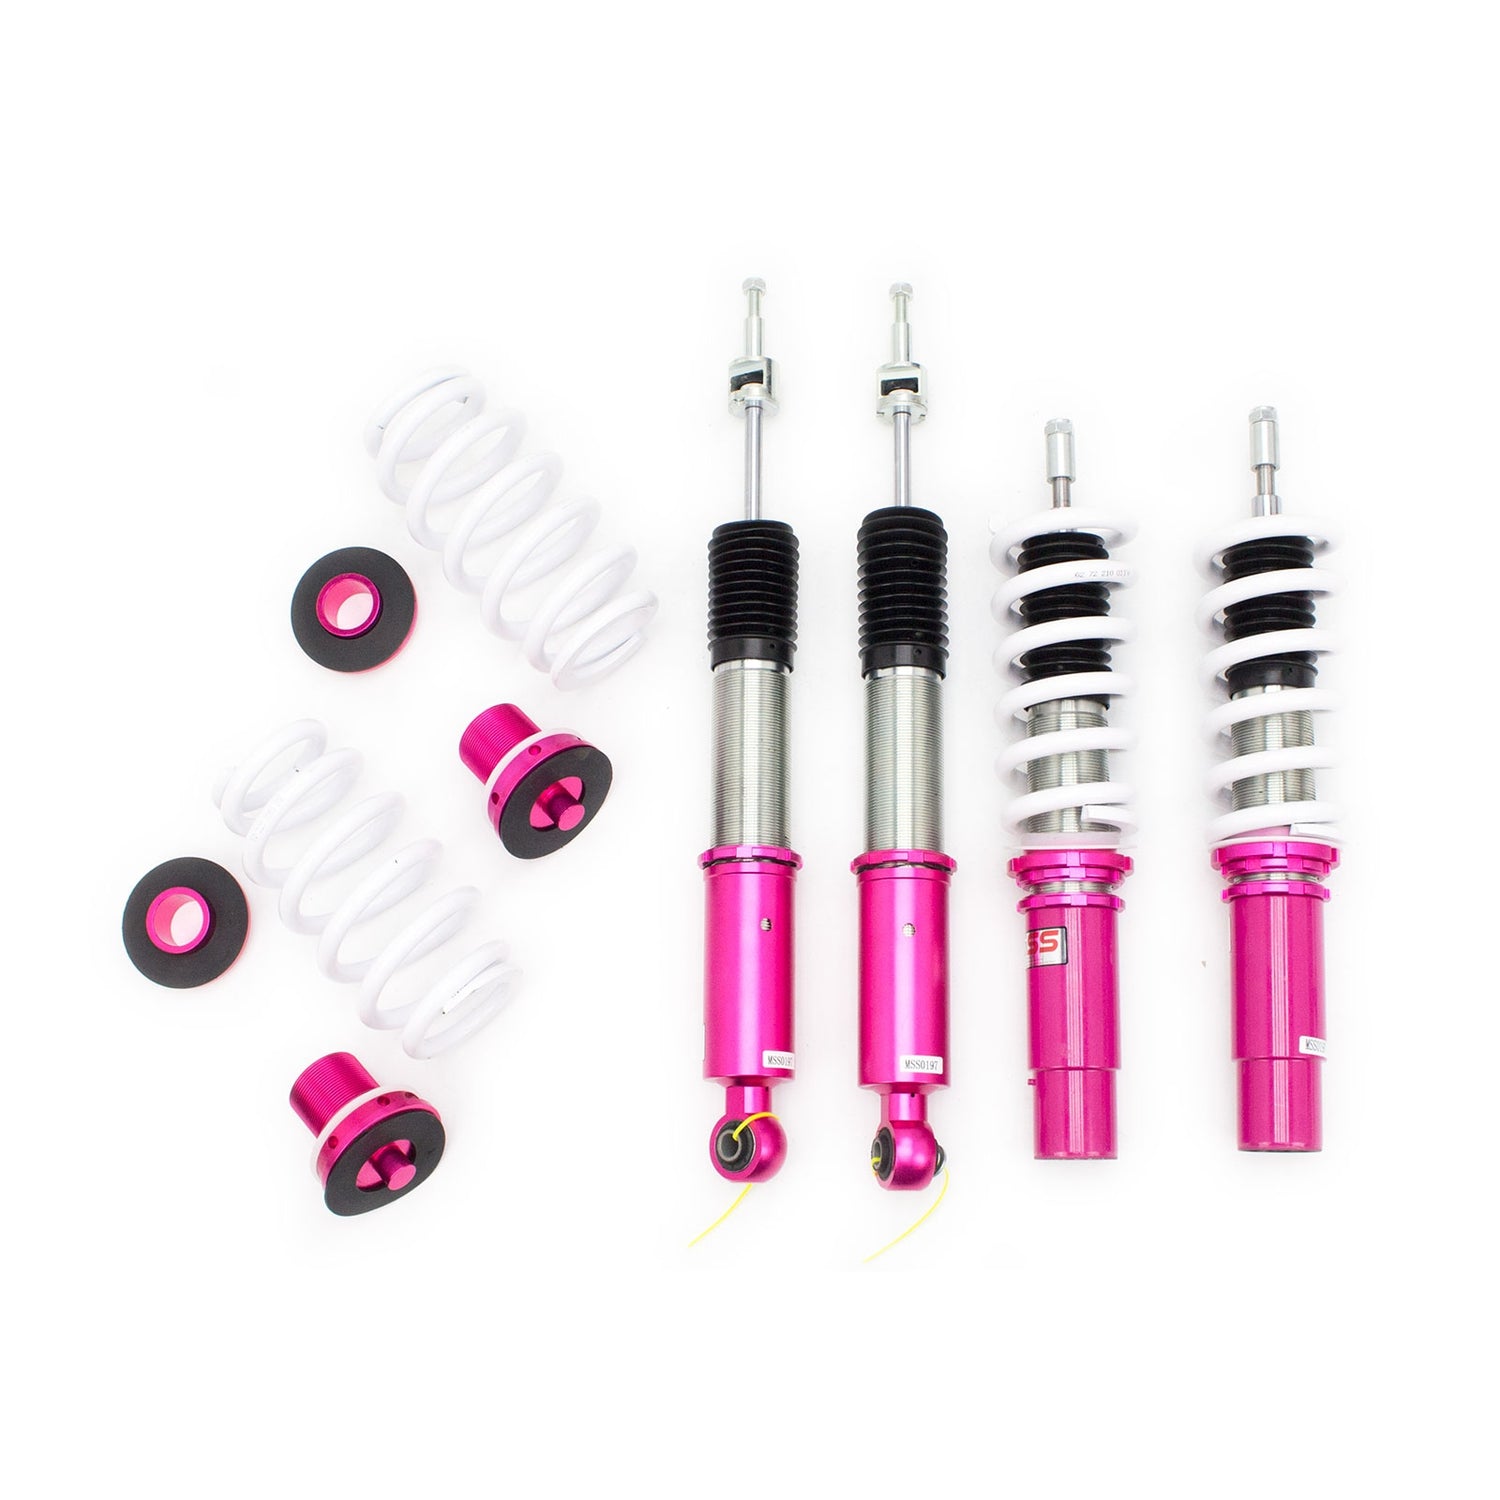 Godspeed(MSS0197-A) MonoSS Coilover Lowering Kit, Fully Adjustable, Ride Height, Spring Tension And 16 Click Damping, Audi A6/A6 Quattro 2012-17